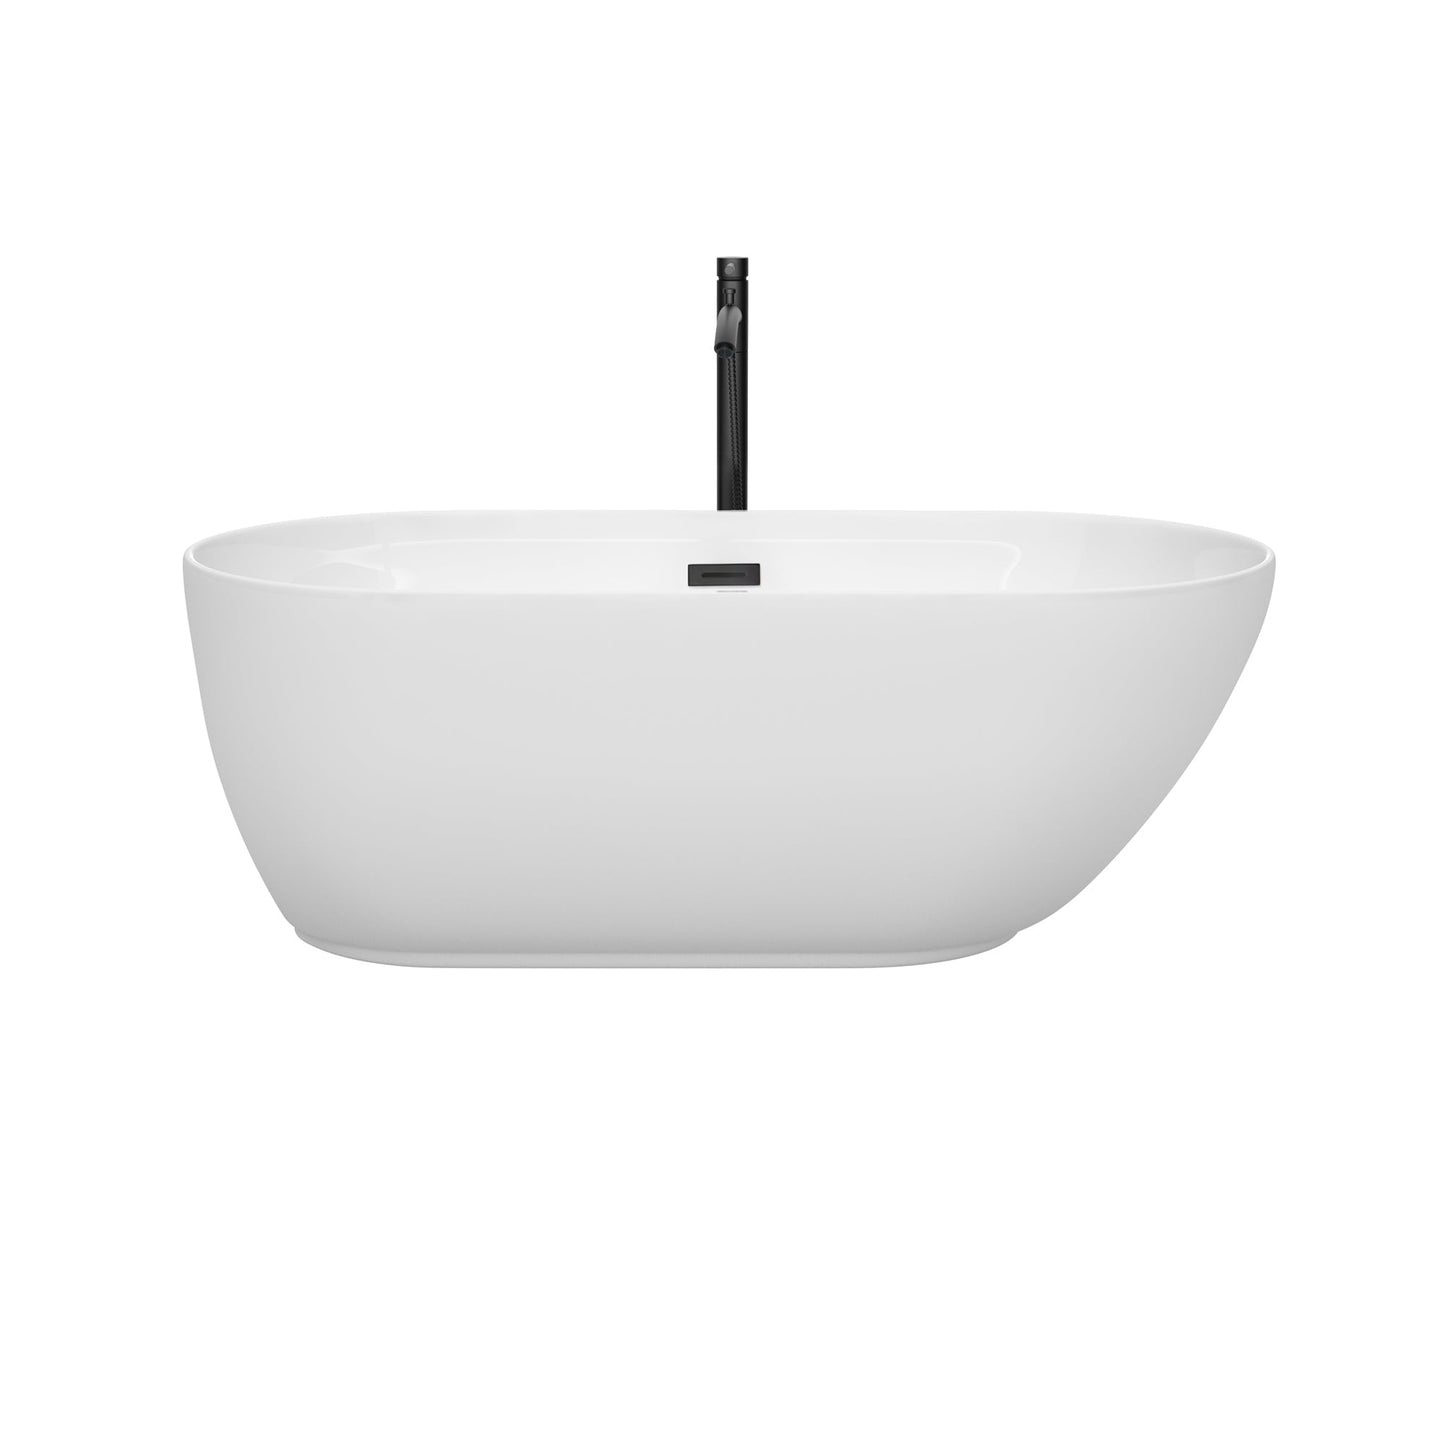 Wyndham Collection Melissa 60" Freestanding Bathtub in White With Floor Mounted Faucet, Drain and Overflow Trim in Matte Black